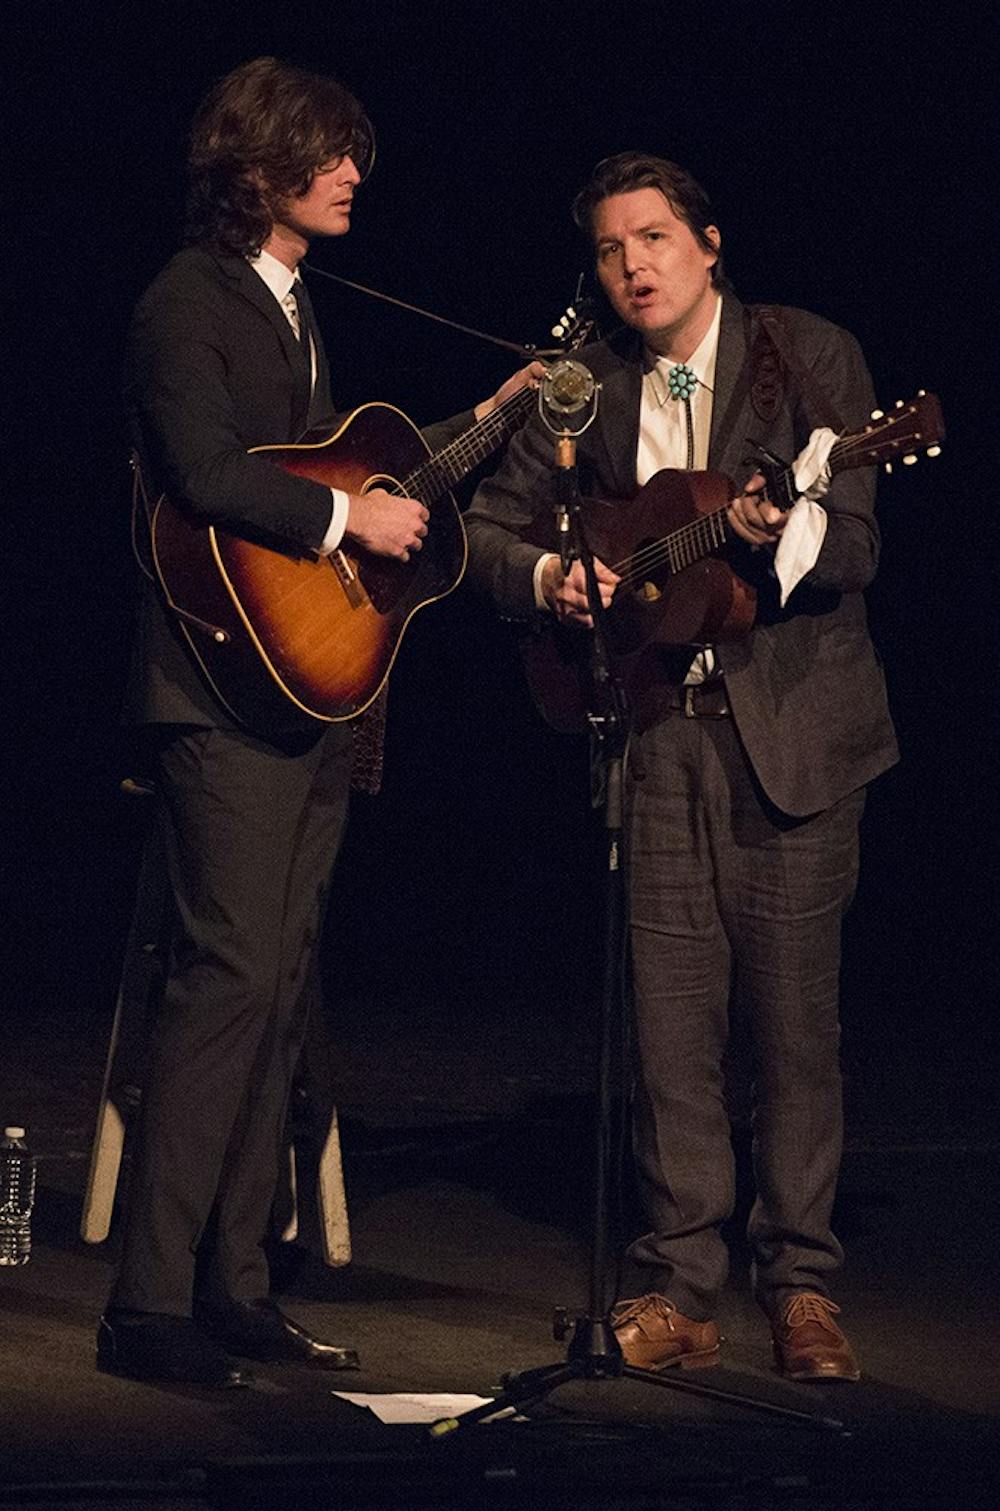 <p>The Milk Carton Kids wowed the crowd with their onstage energy at the Jefferson.</p>